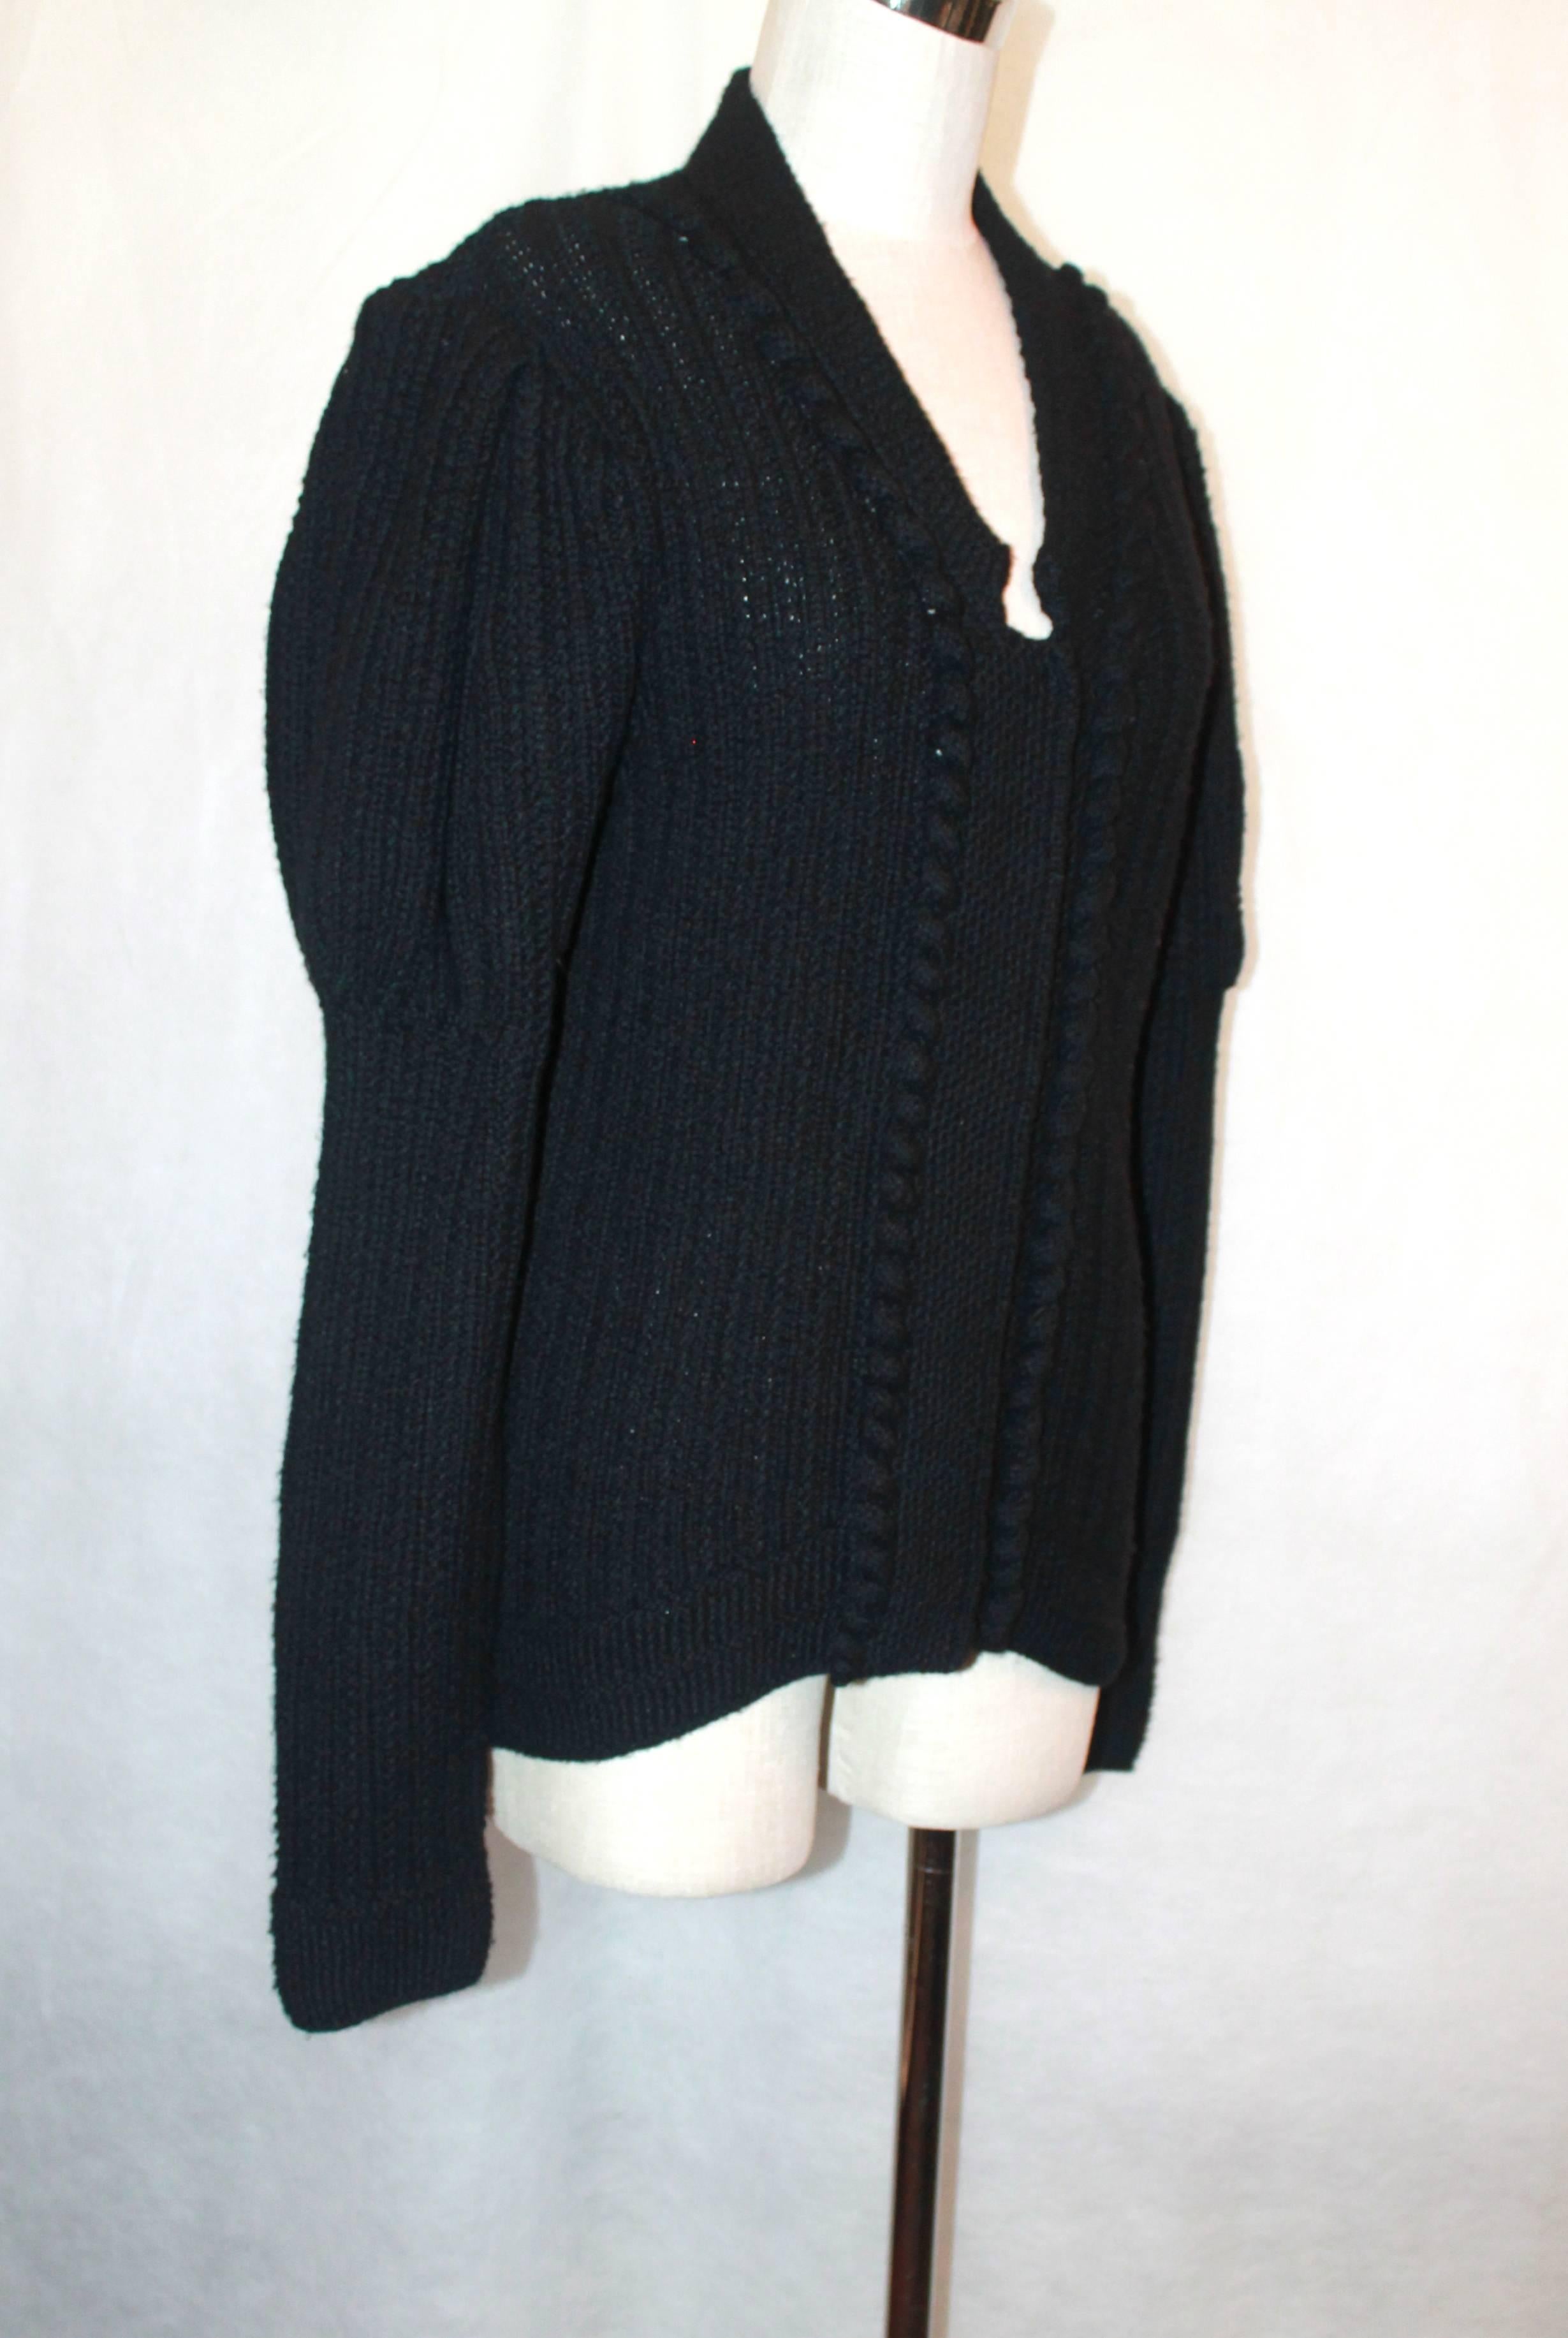 Oscar de la Renta Black Cashmere Knitted Heavy Sweater - Large.  This sweater is in excellent condition.  It has snap buttons and slight poof on the sleeve.  This sweater is a heavier knit.

Measurements:
Bust: 20.5